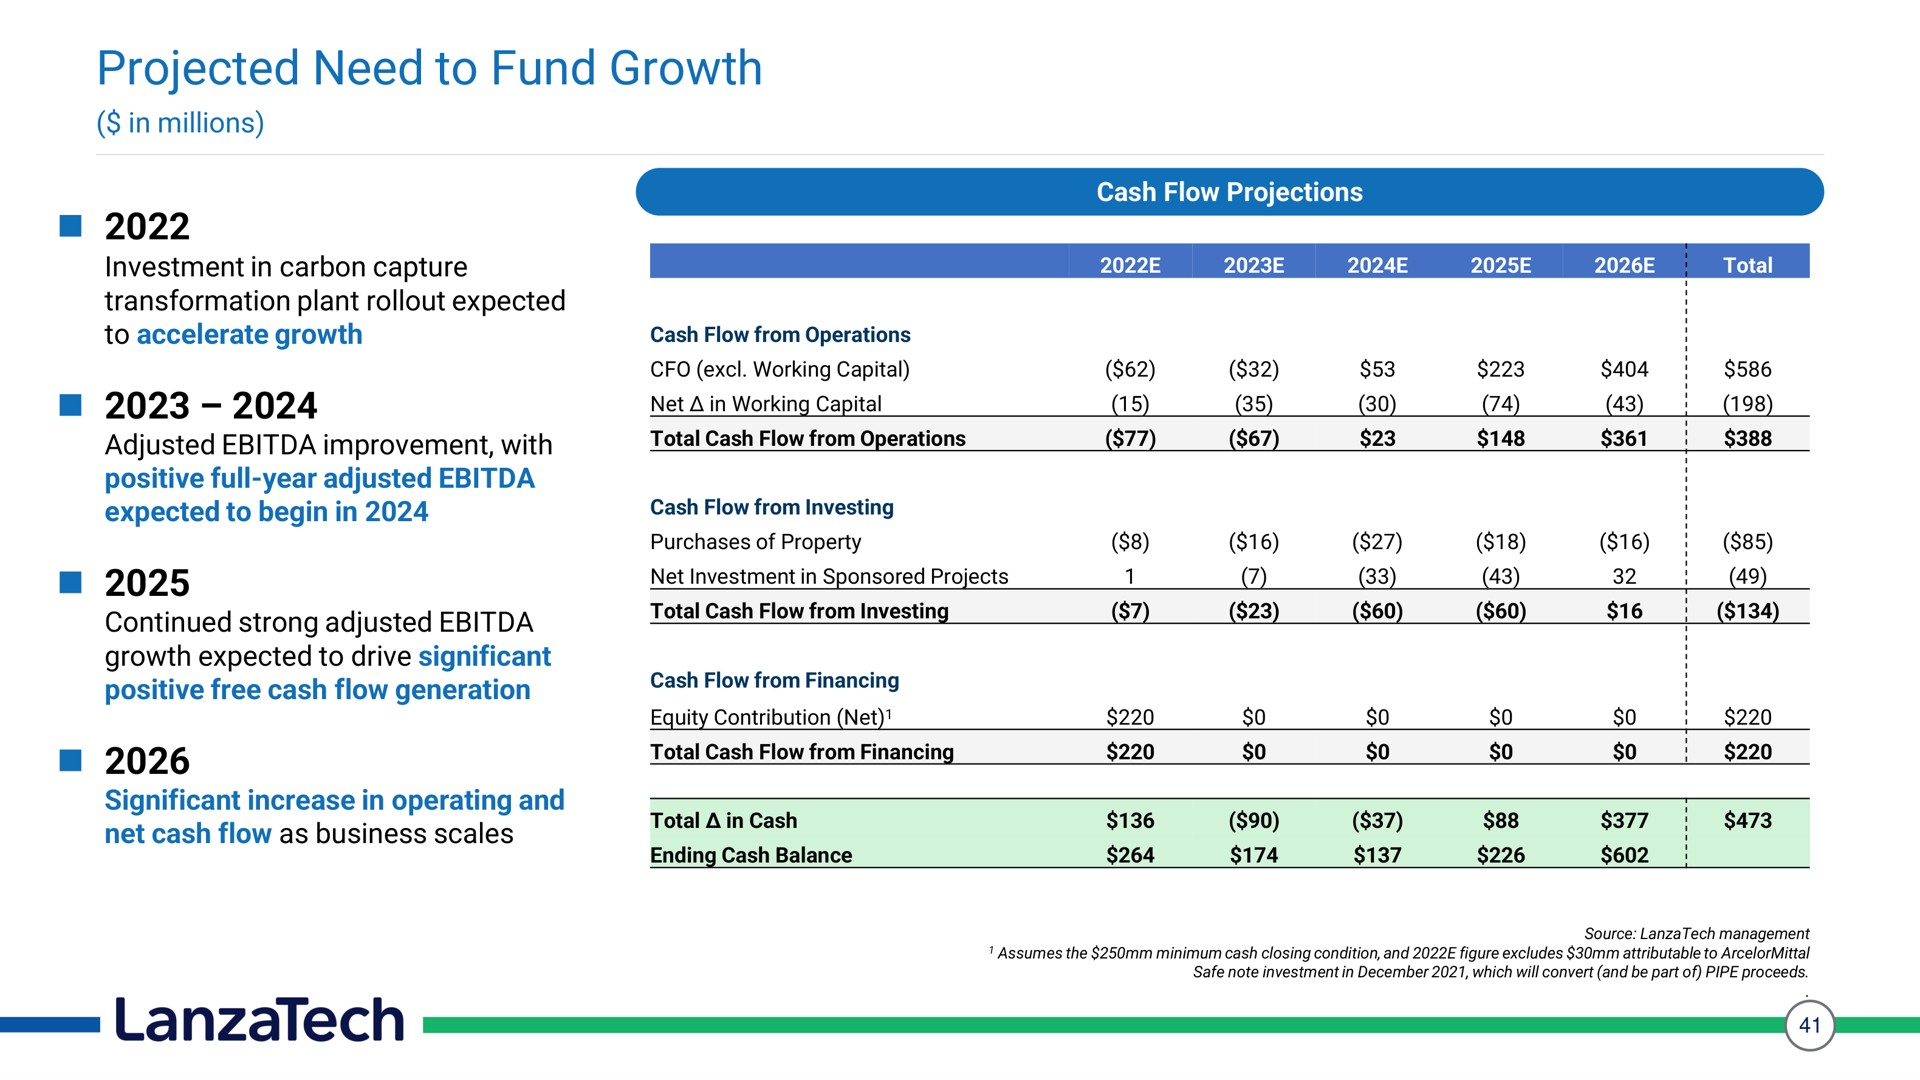 projected need to fund growth | LanzaTech